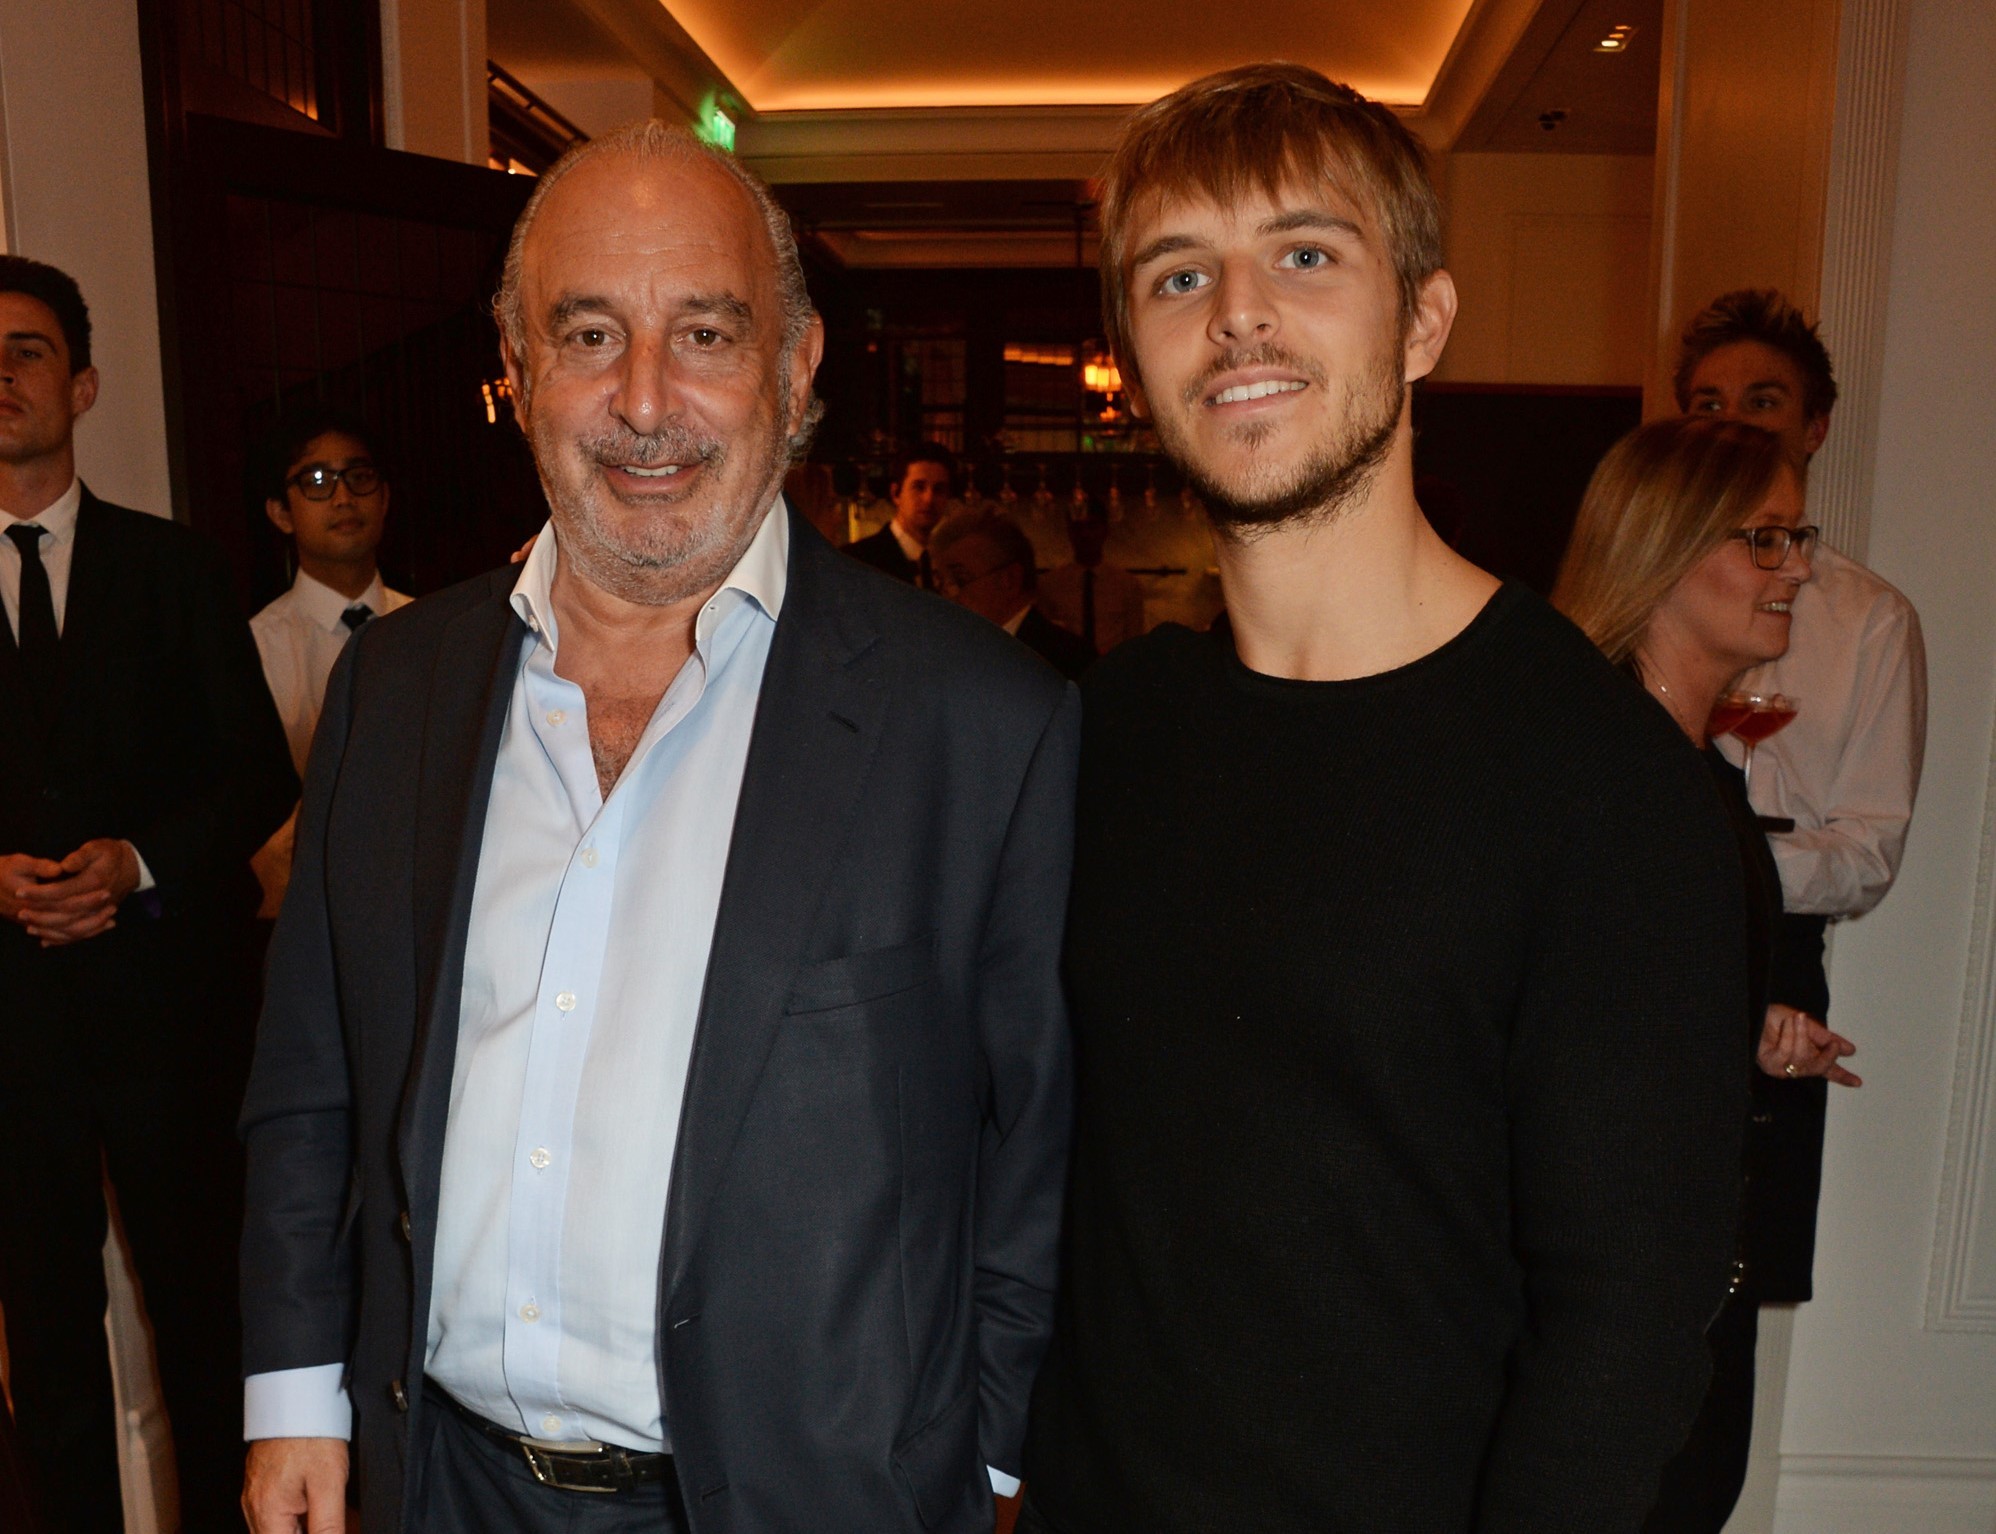 LONDON, EnglandD - APRIL 18:  Sir Philip Green (L) and Brandon Green attend an event hosted by Naomi Campbell, Burberry and TASCHEN to celebrate the launch of 'Naomi' at Burberry's at Thomas's on April 18, 2016 in London, England  (Photo by David M. Benet (Foto: Getty Images)